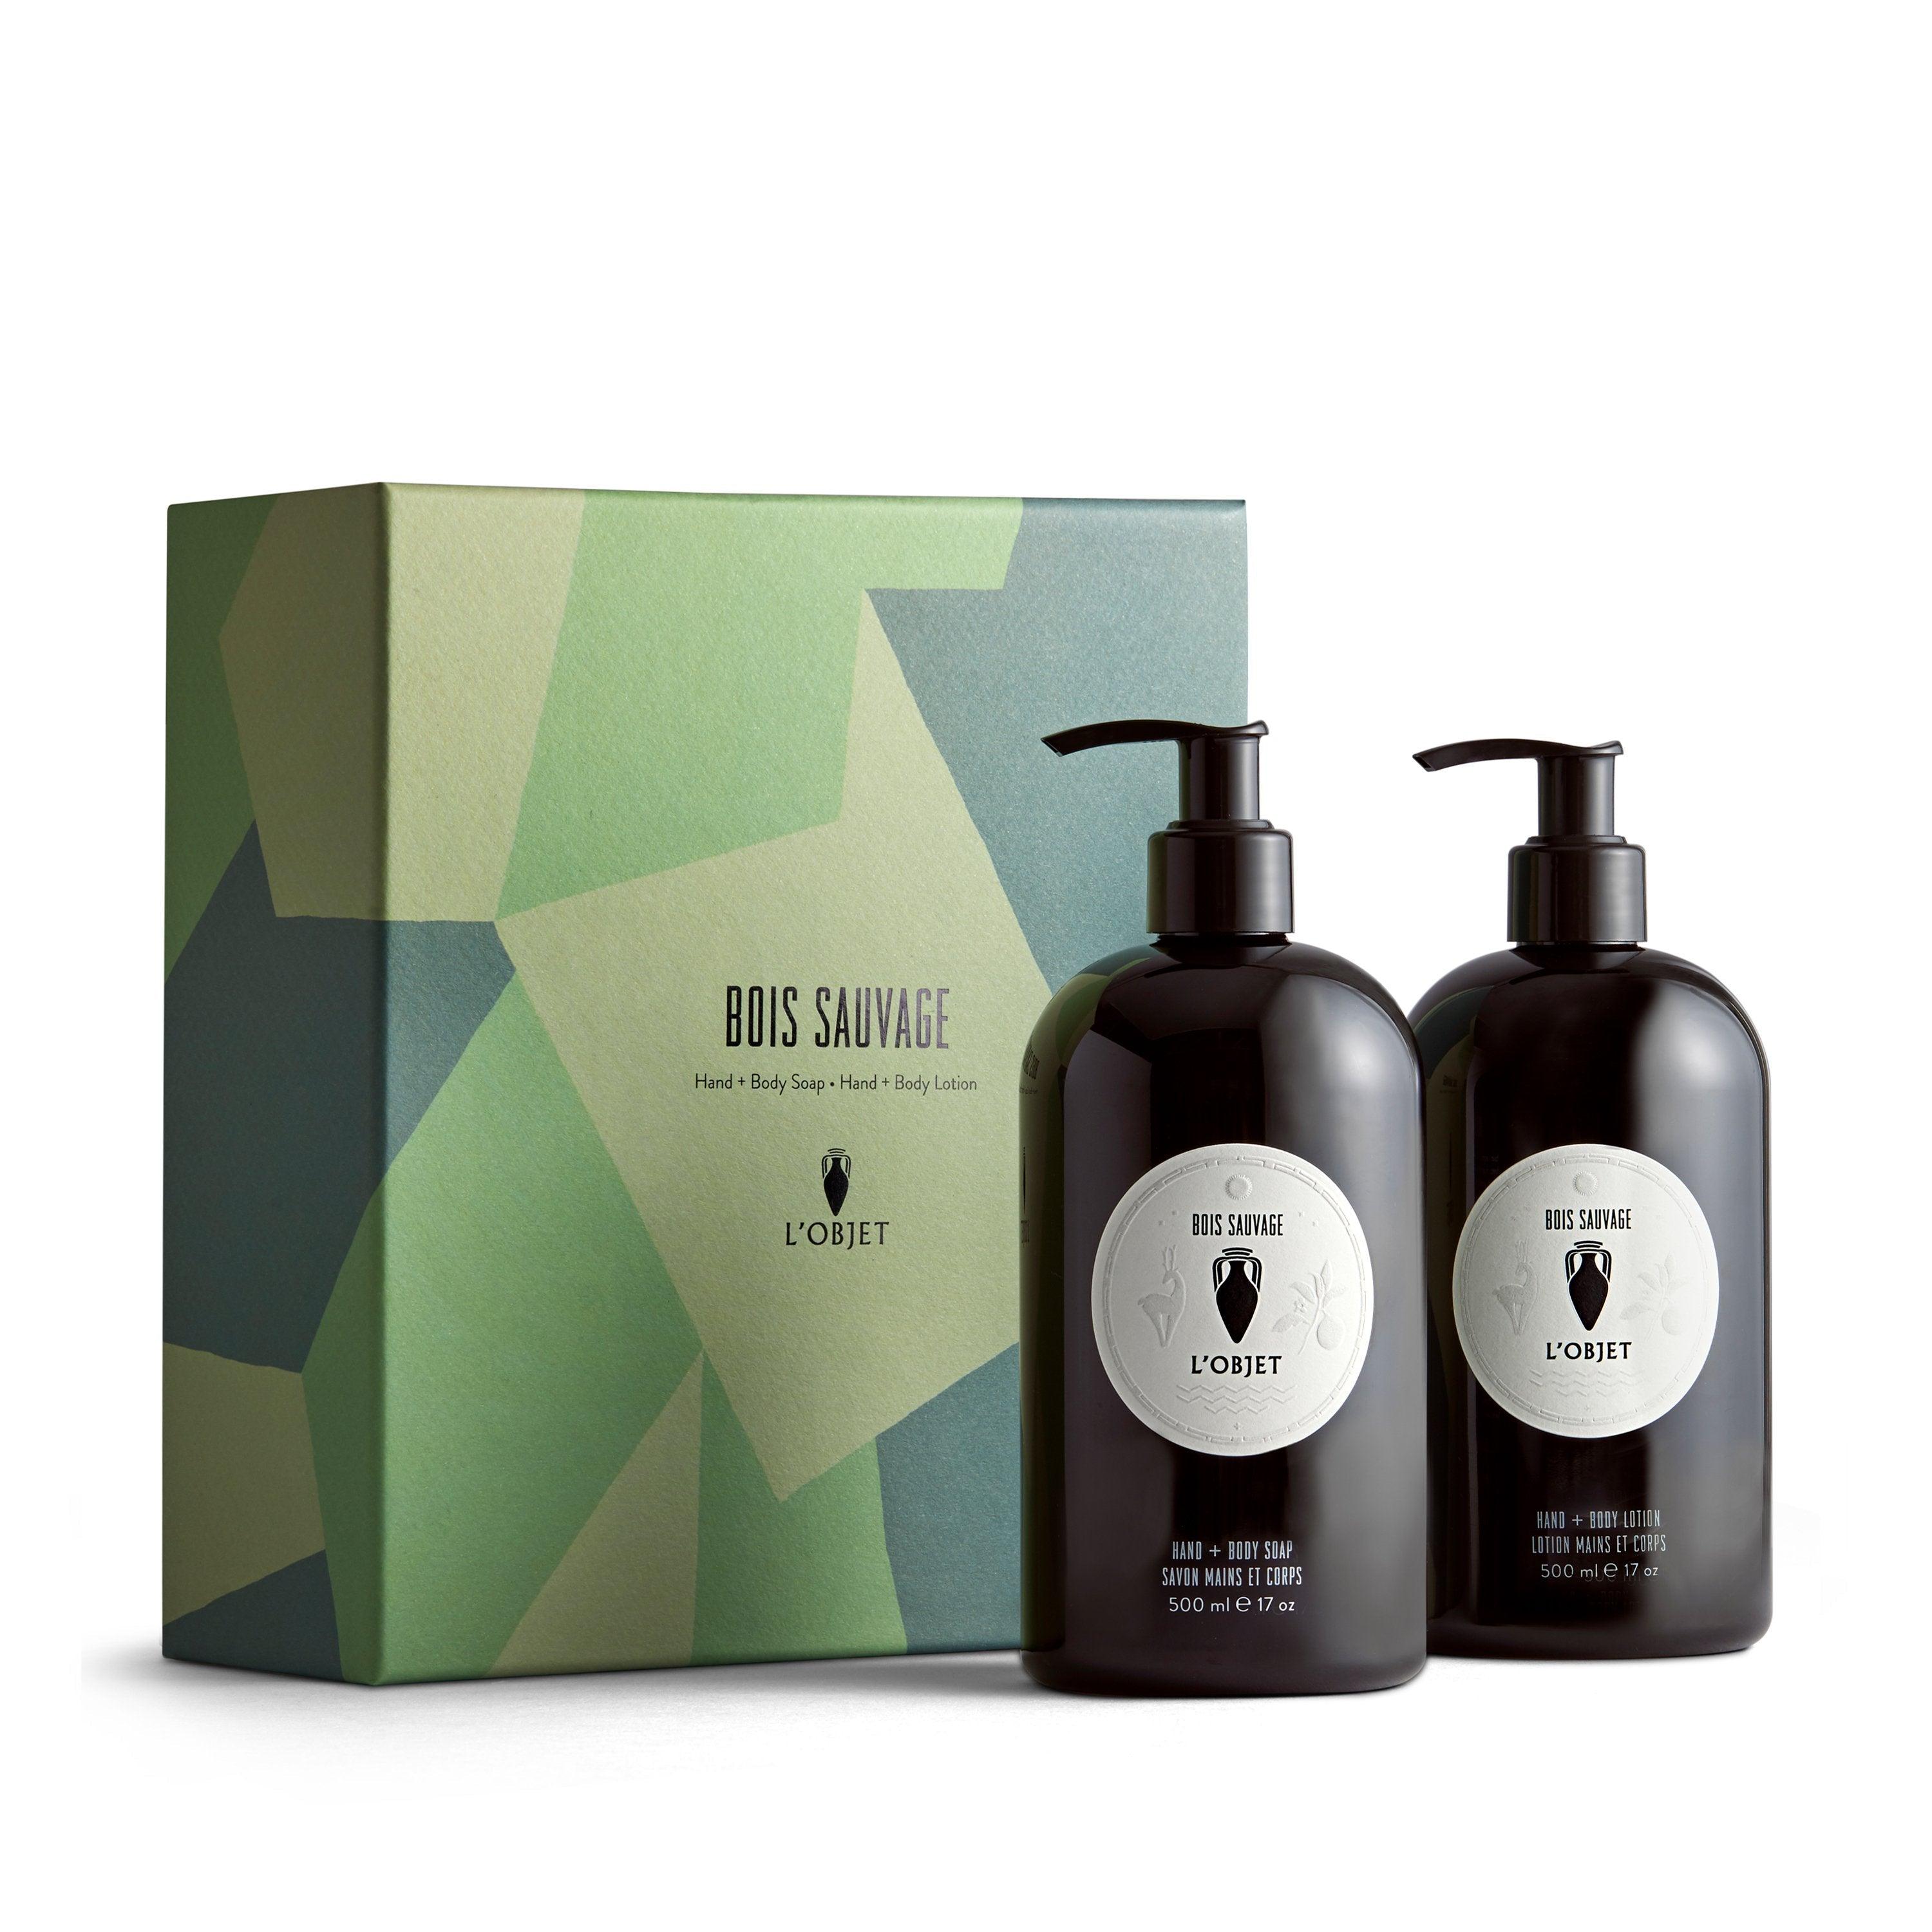 Bois Sauvage Hand and Body Soap + Lotion Gift Set - L'OBJET